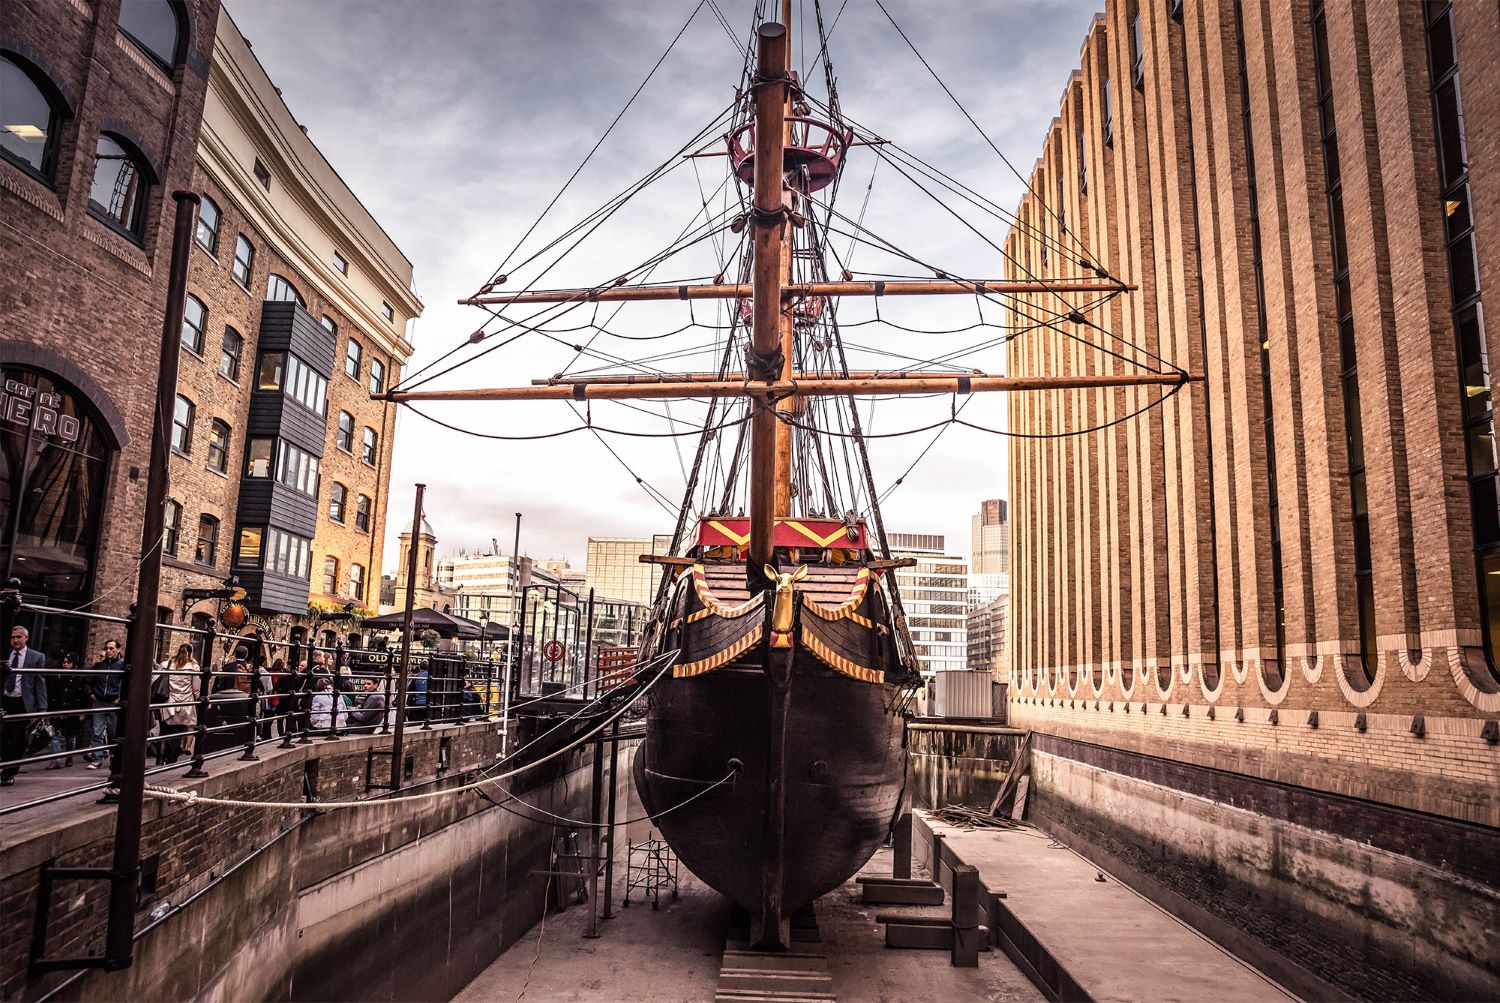 The Golden Hinde 3